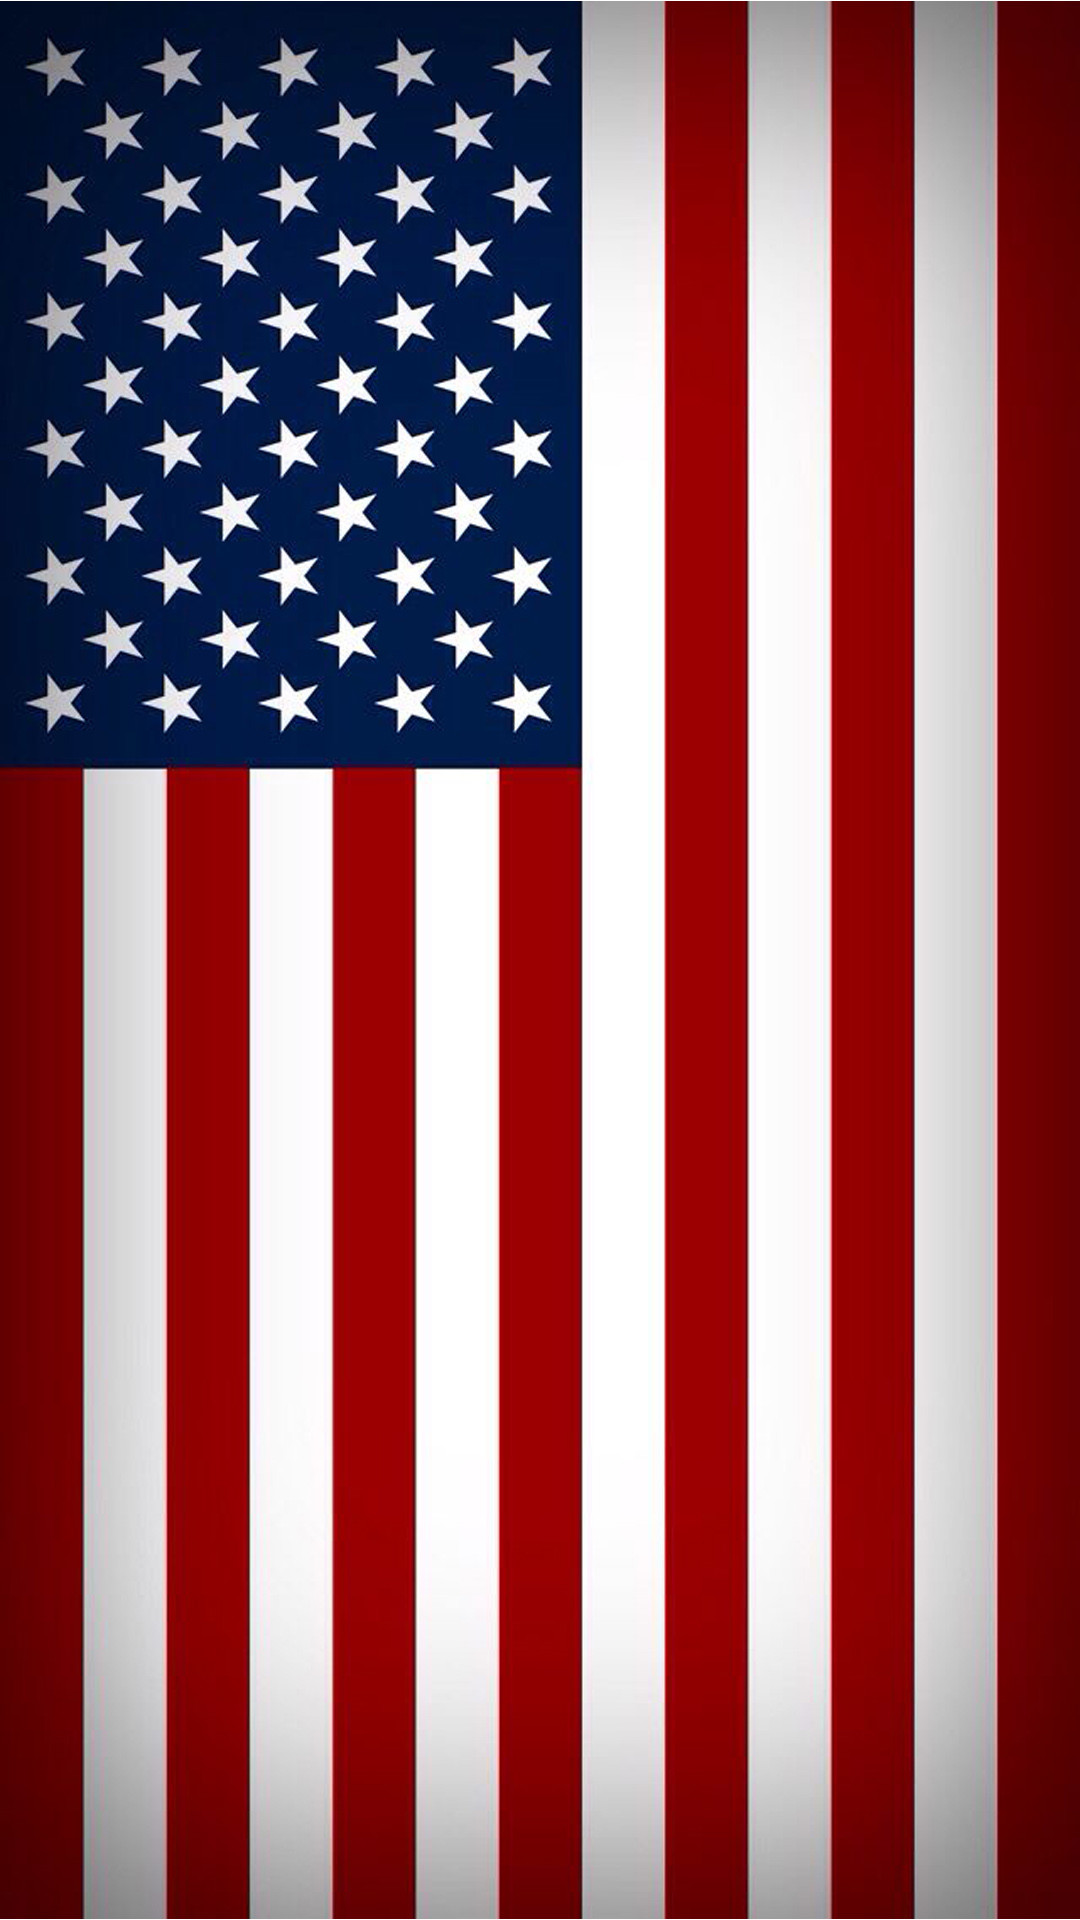 0 American Flag Iphone 6 Wallpaper Pinterest American - Kennedy Space Center , HD Wallpaper & Backgrounds